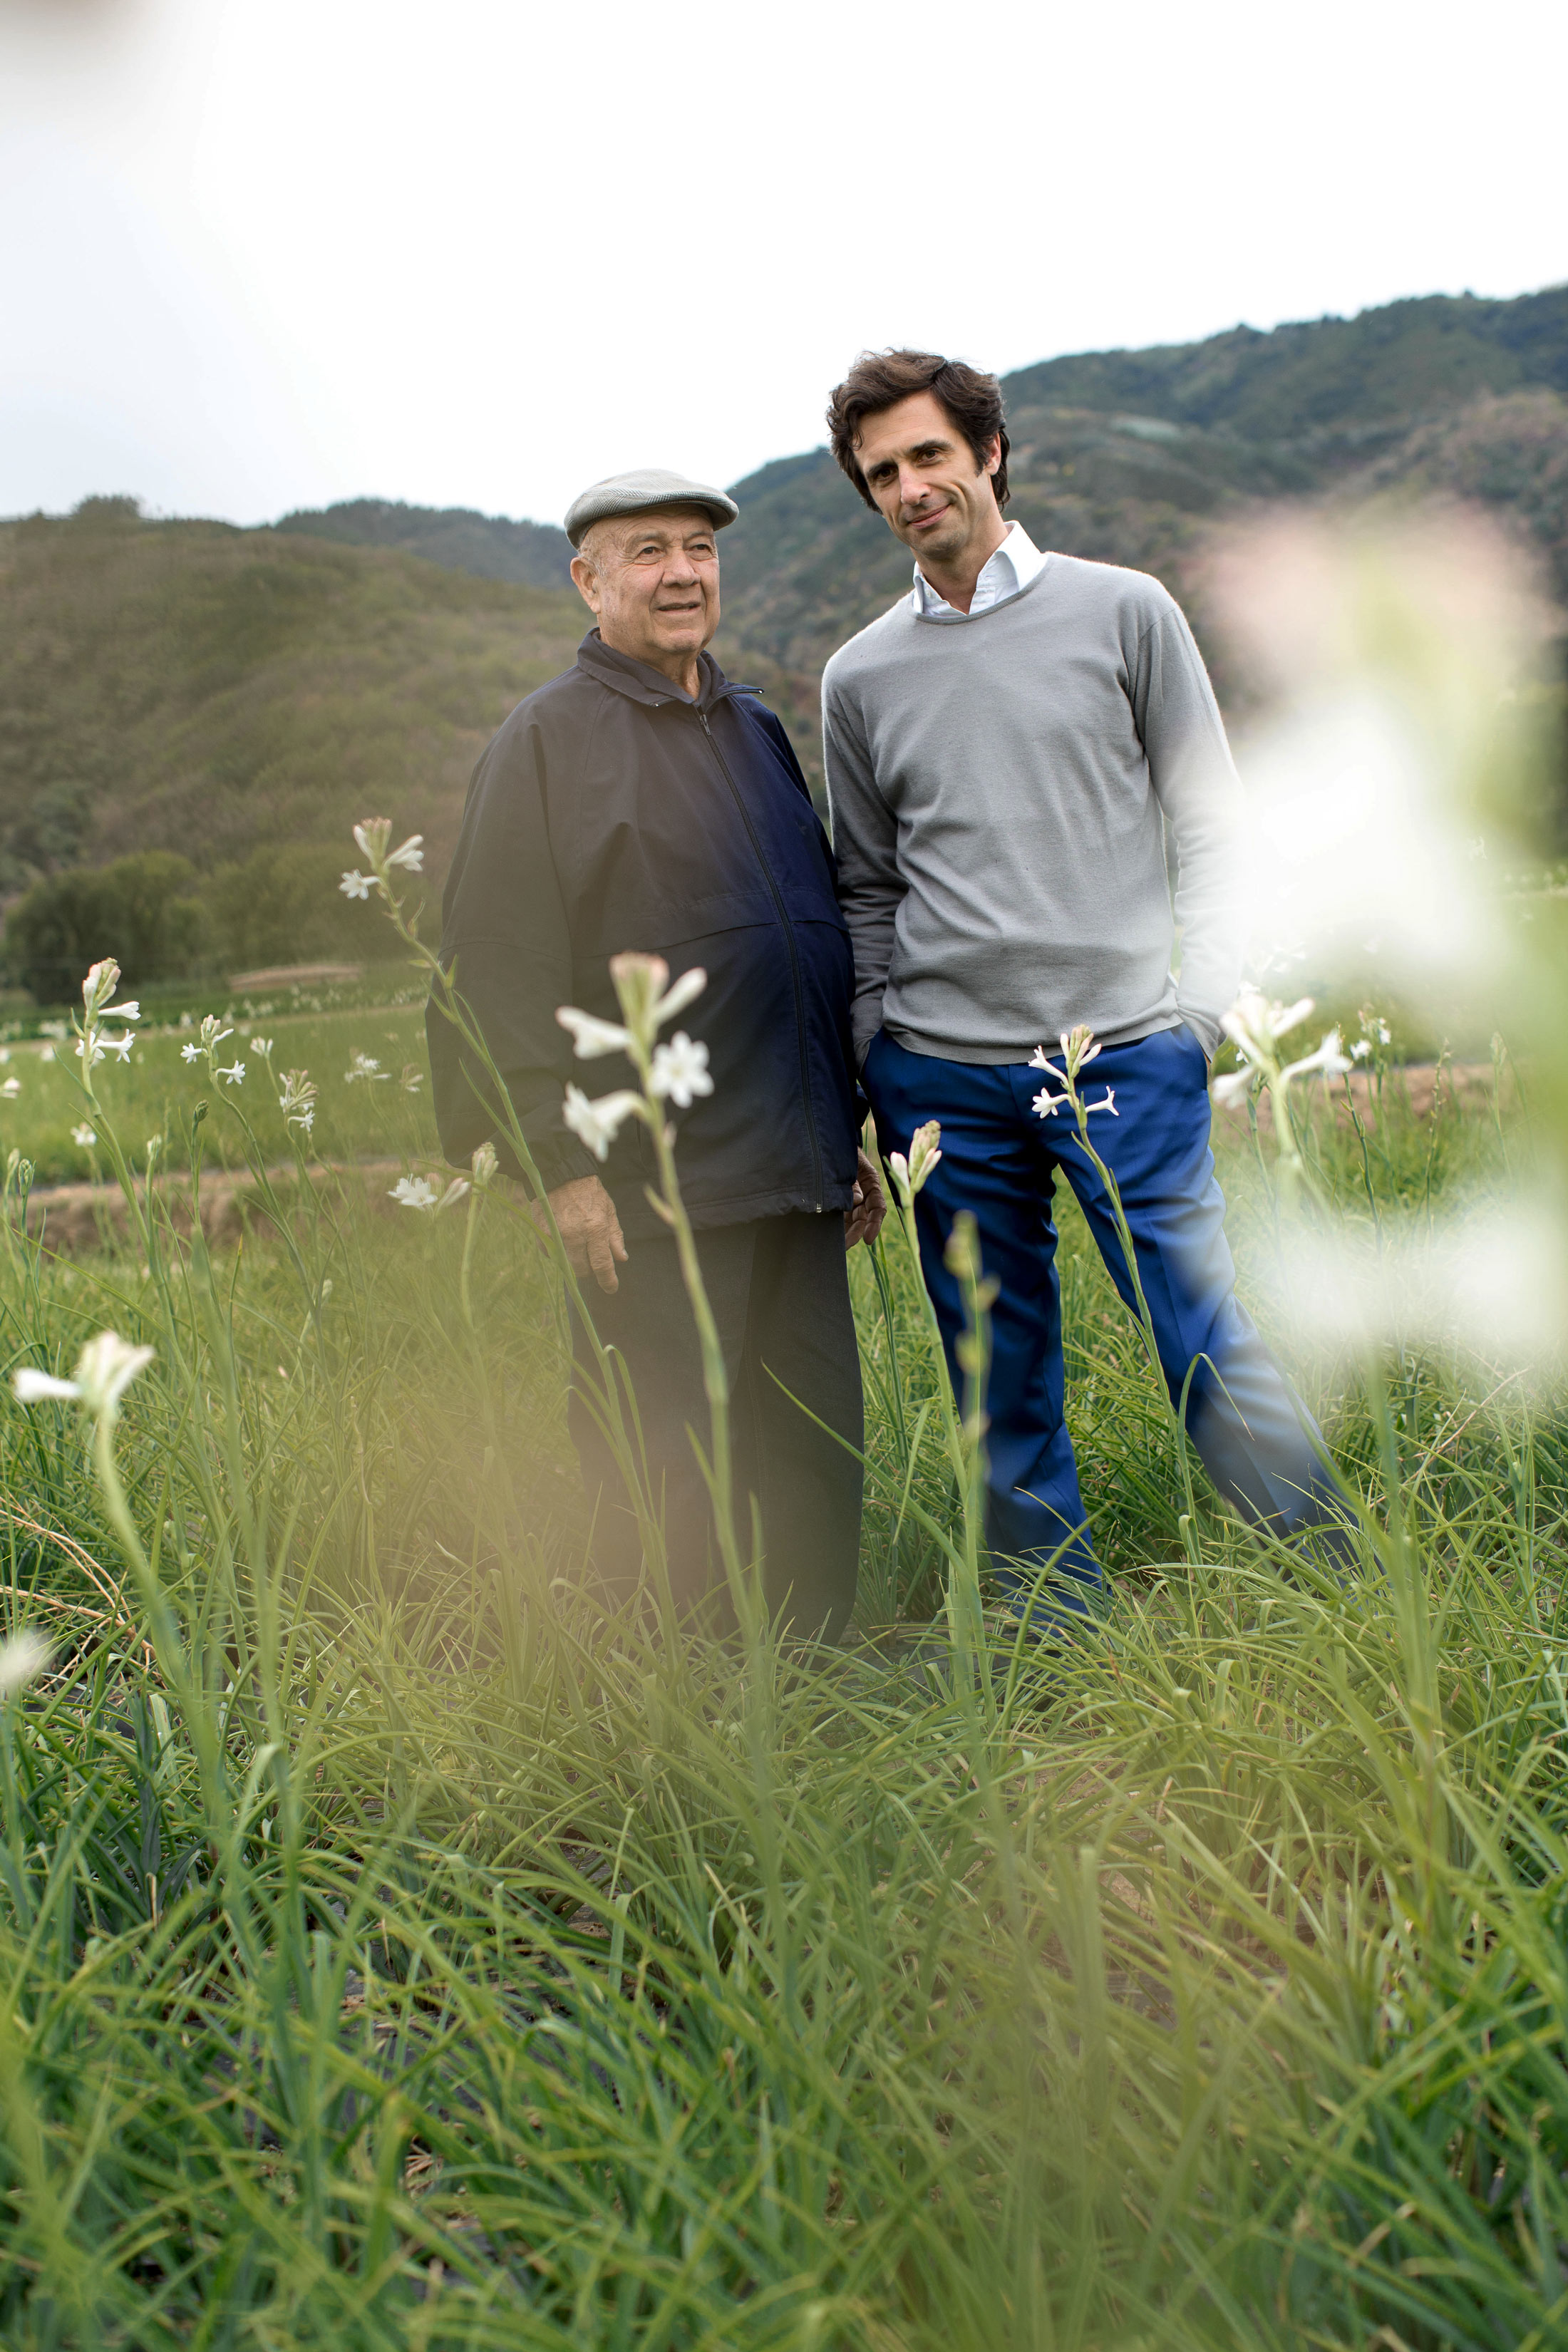 Joseph Mul and Olivier Polge in the Tuberose fields of Chanel, Grasse, France.